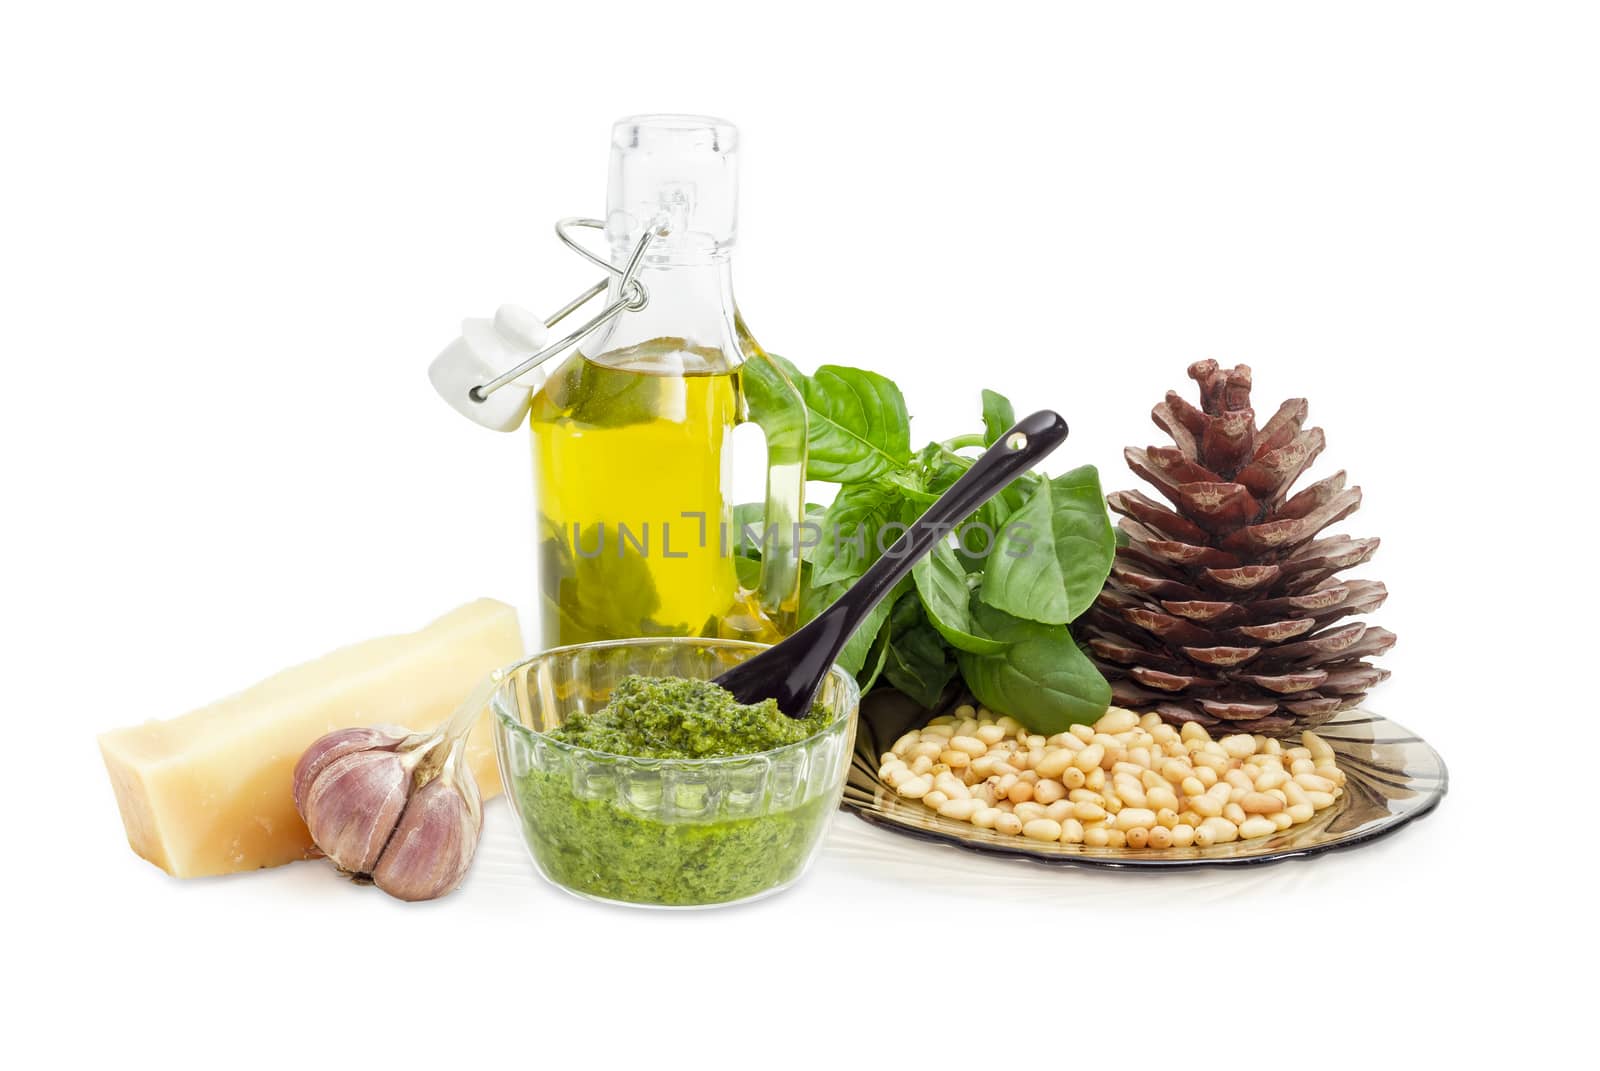 Sauce pesto against of ingredients for its preparation by anmbph